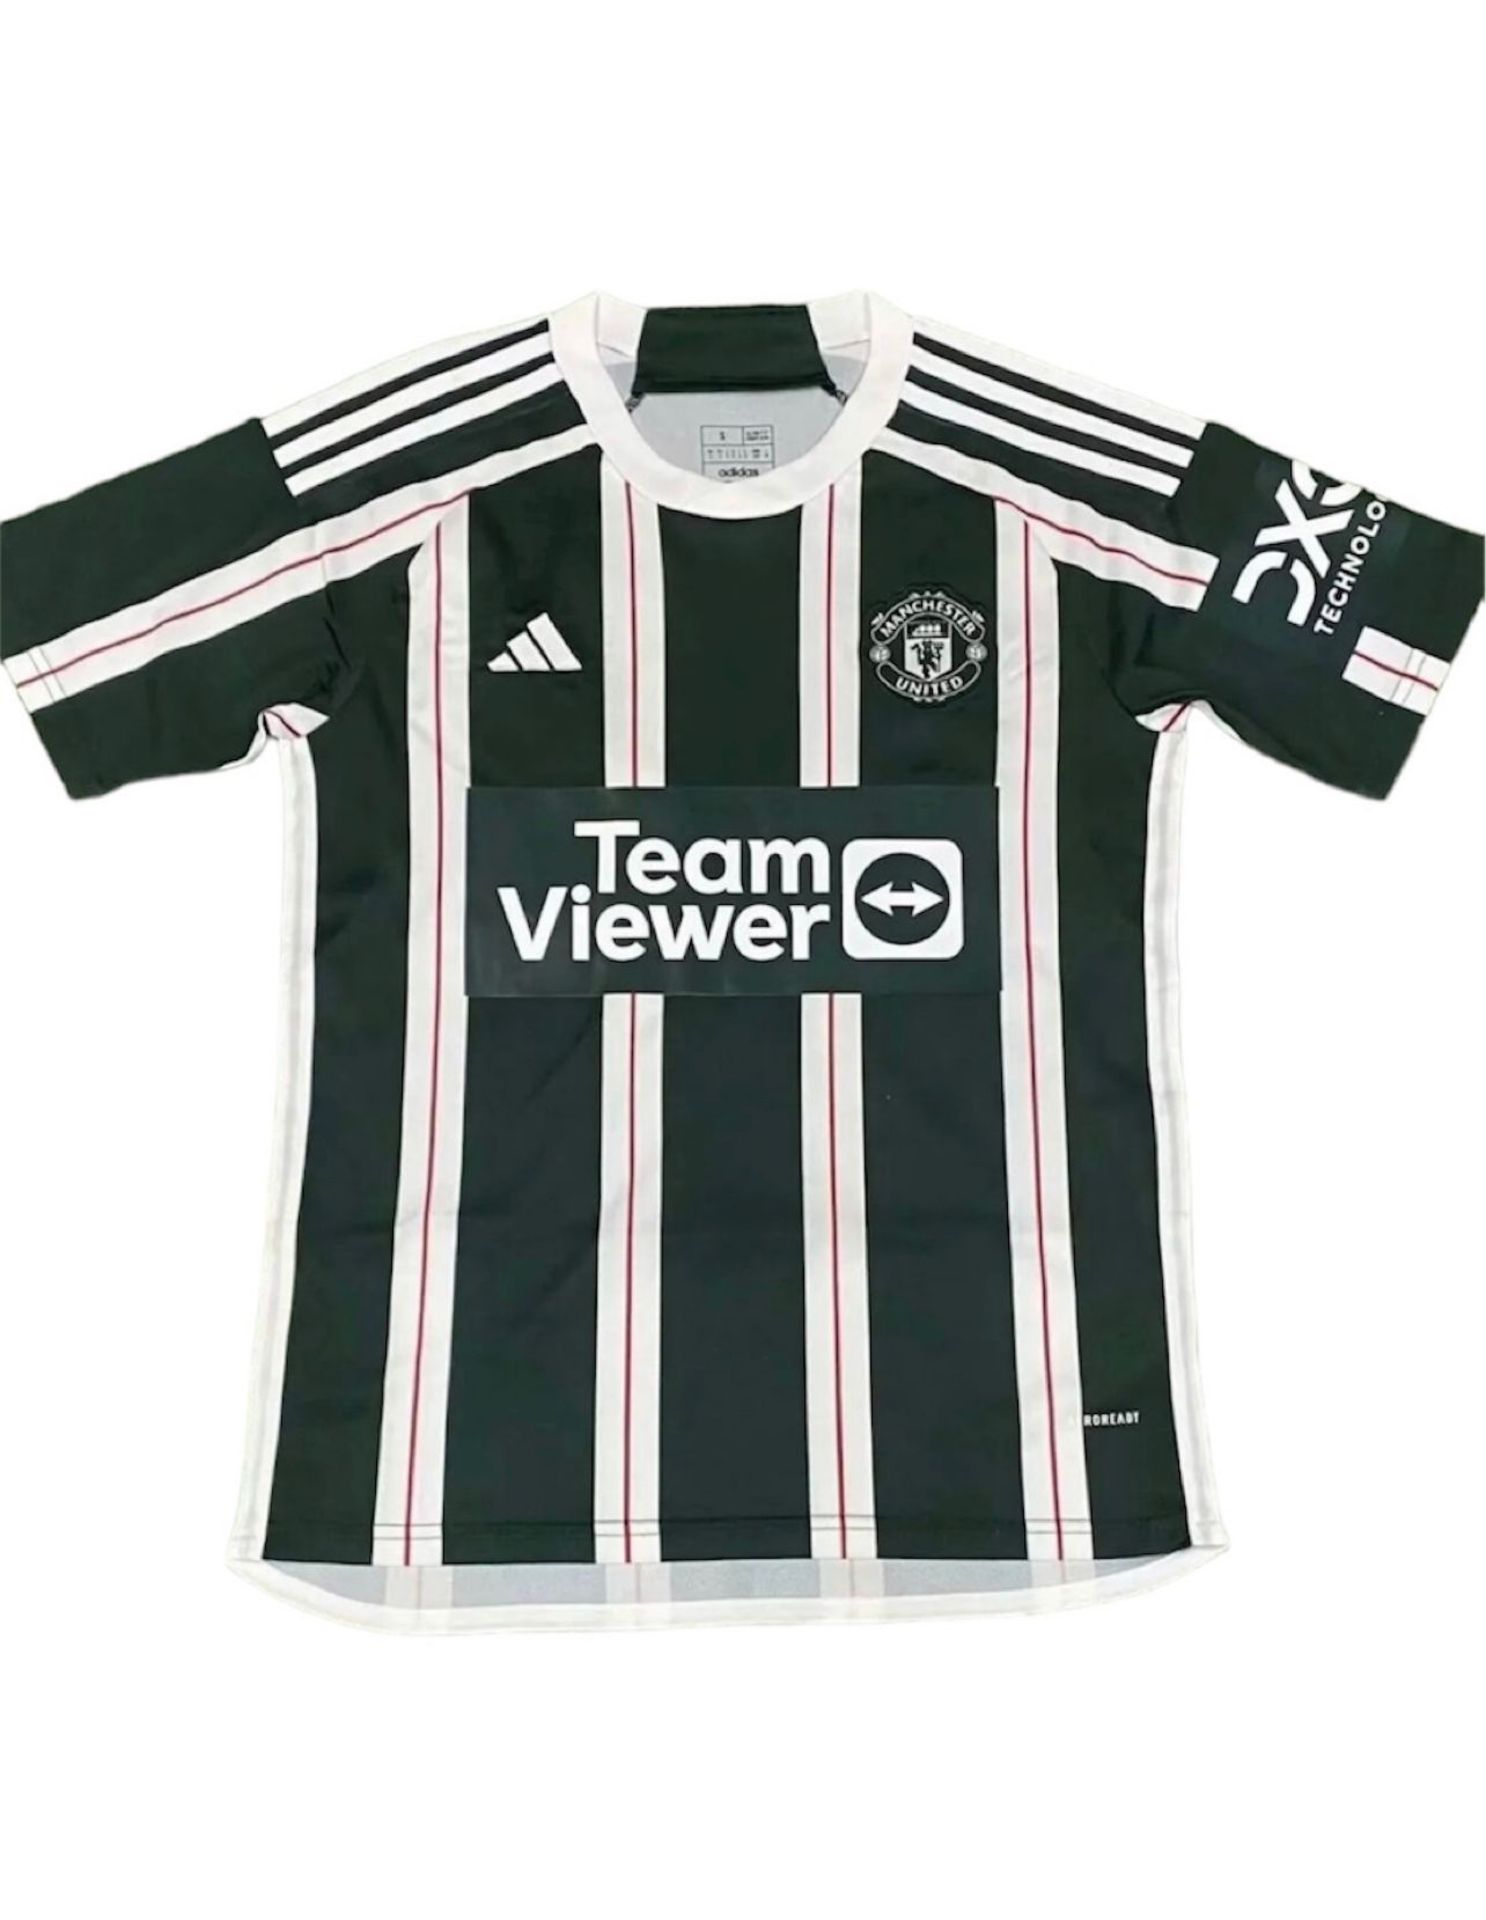 Mix man United Style 23/24 home, away, and third shirts - Image 2 of 6